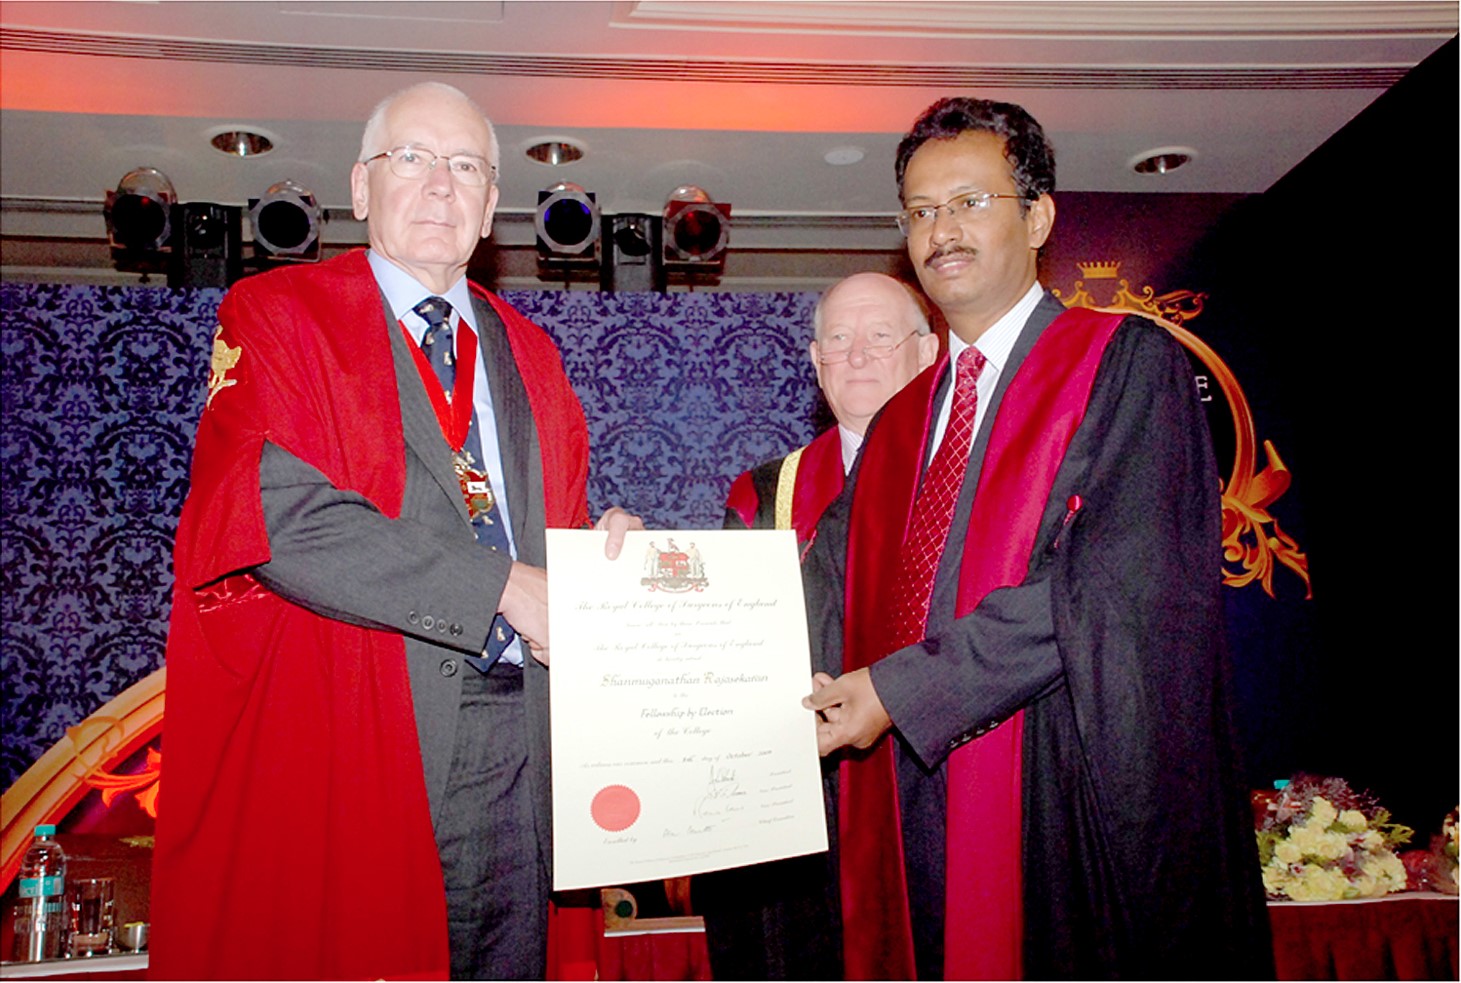 ‘Honorary Fellowship' of the Royal College of Surgeons, 2010